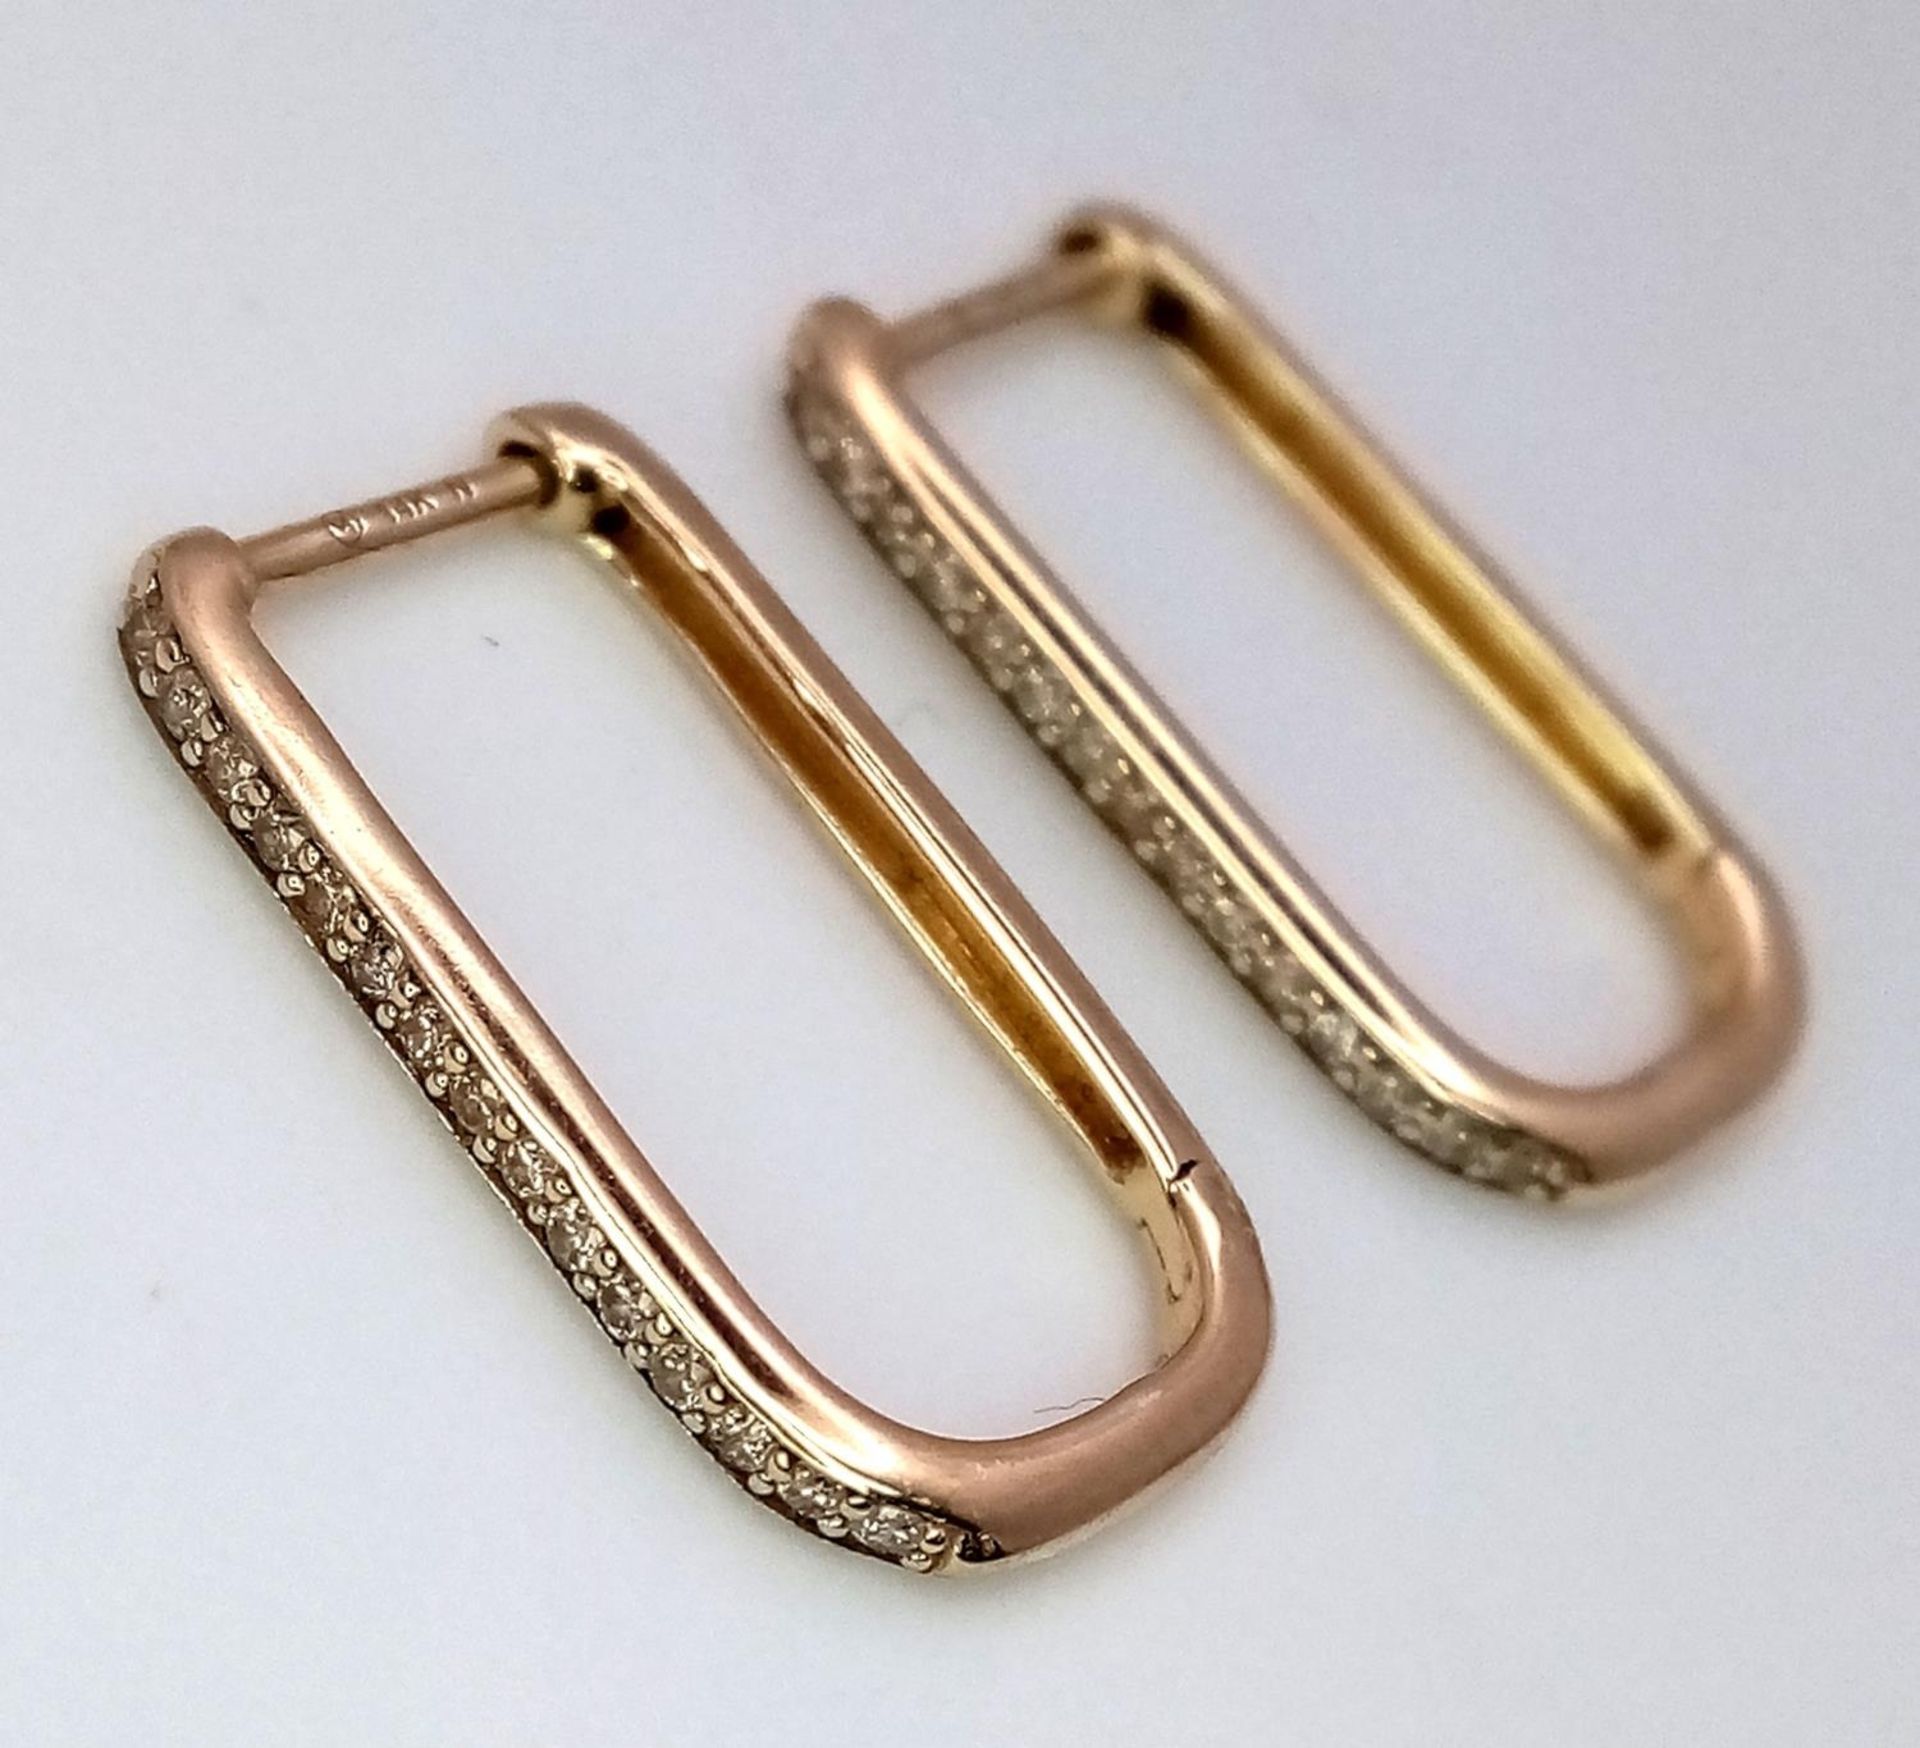 A Pair of 14K Yellow Gold and Diamond Massika Rectangular Earrings. 1.6g total weight. - Image 2 of 4